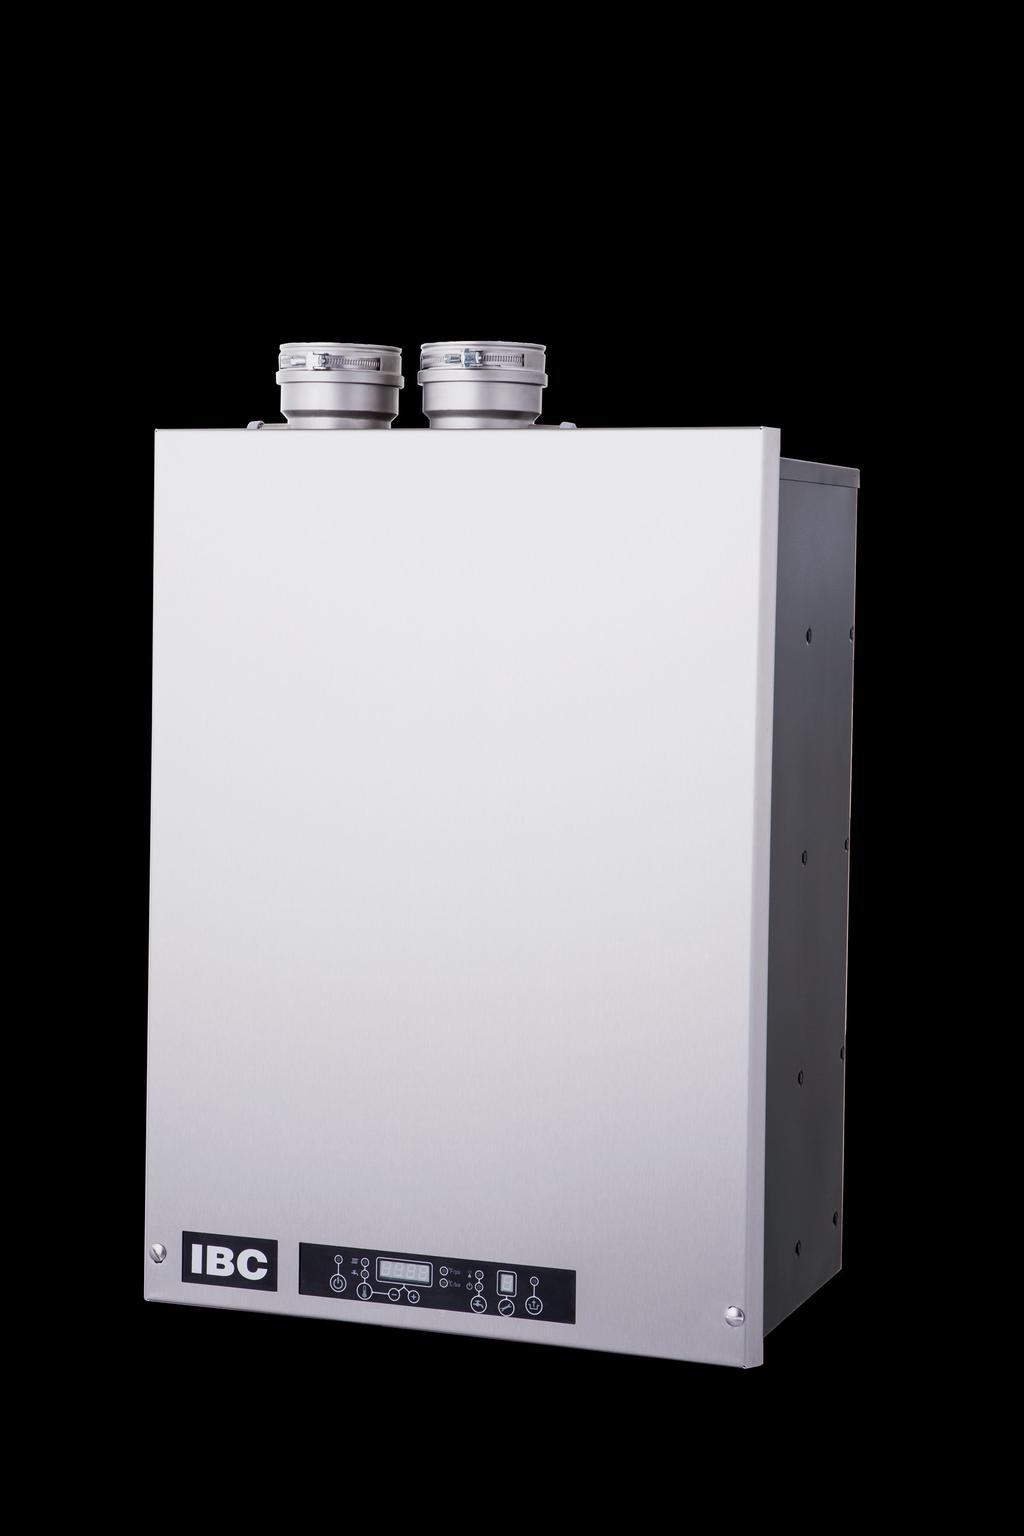 DC 23-84 23,000 to 84,000 BTU/H DC 33-124 33,000 to 124,000 BTU/H DC 29-106 29,000 to 106,000 BTU/H DC 33-160 33,000 to 160,000 BTU/H DUAL CONDENSING COMBI BOILERS At long last On Demand DHW joins